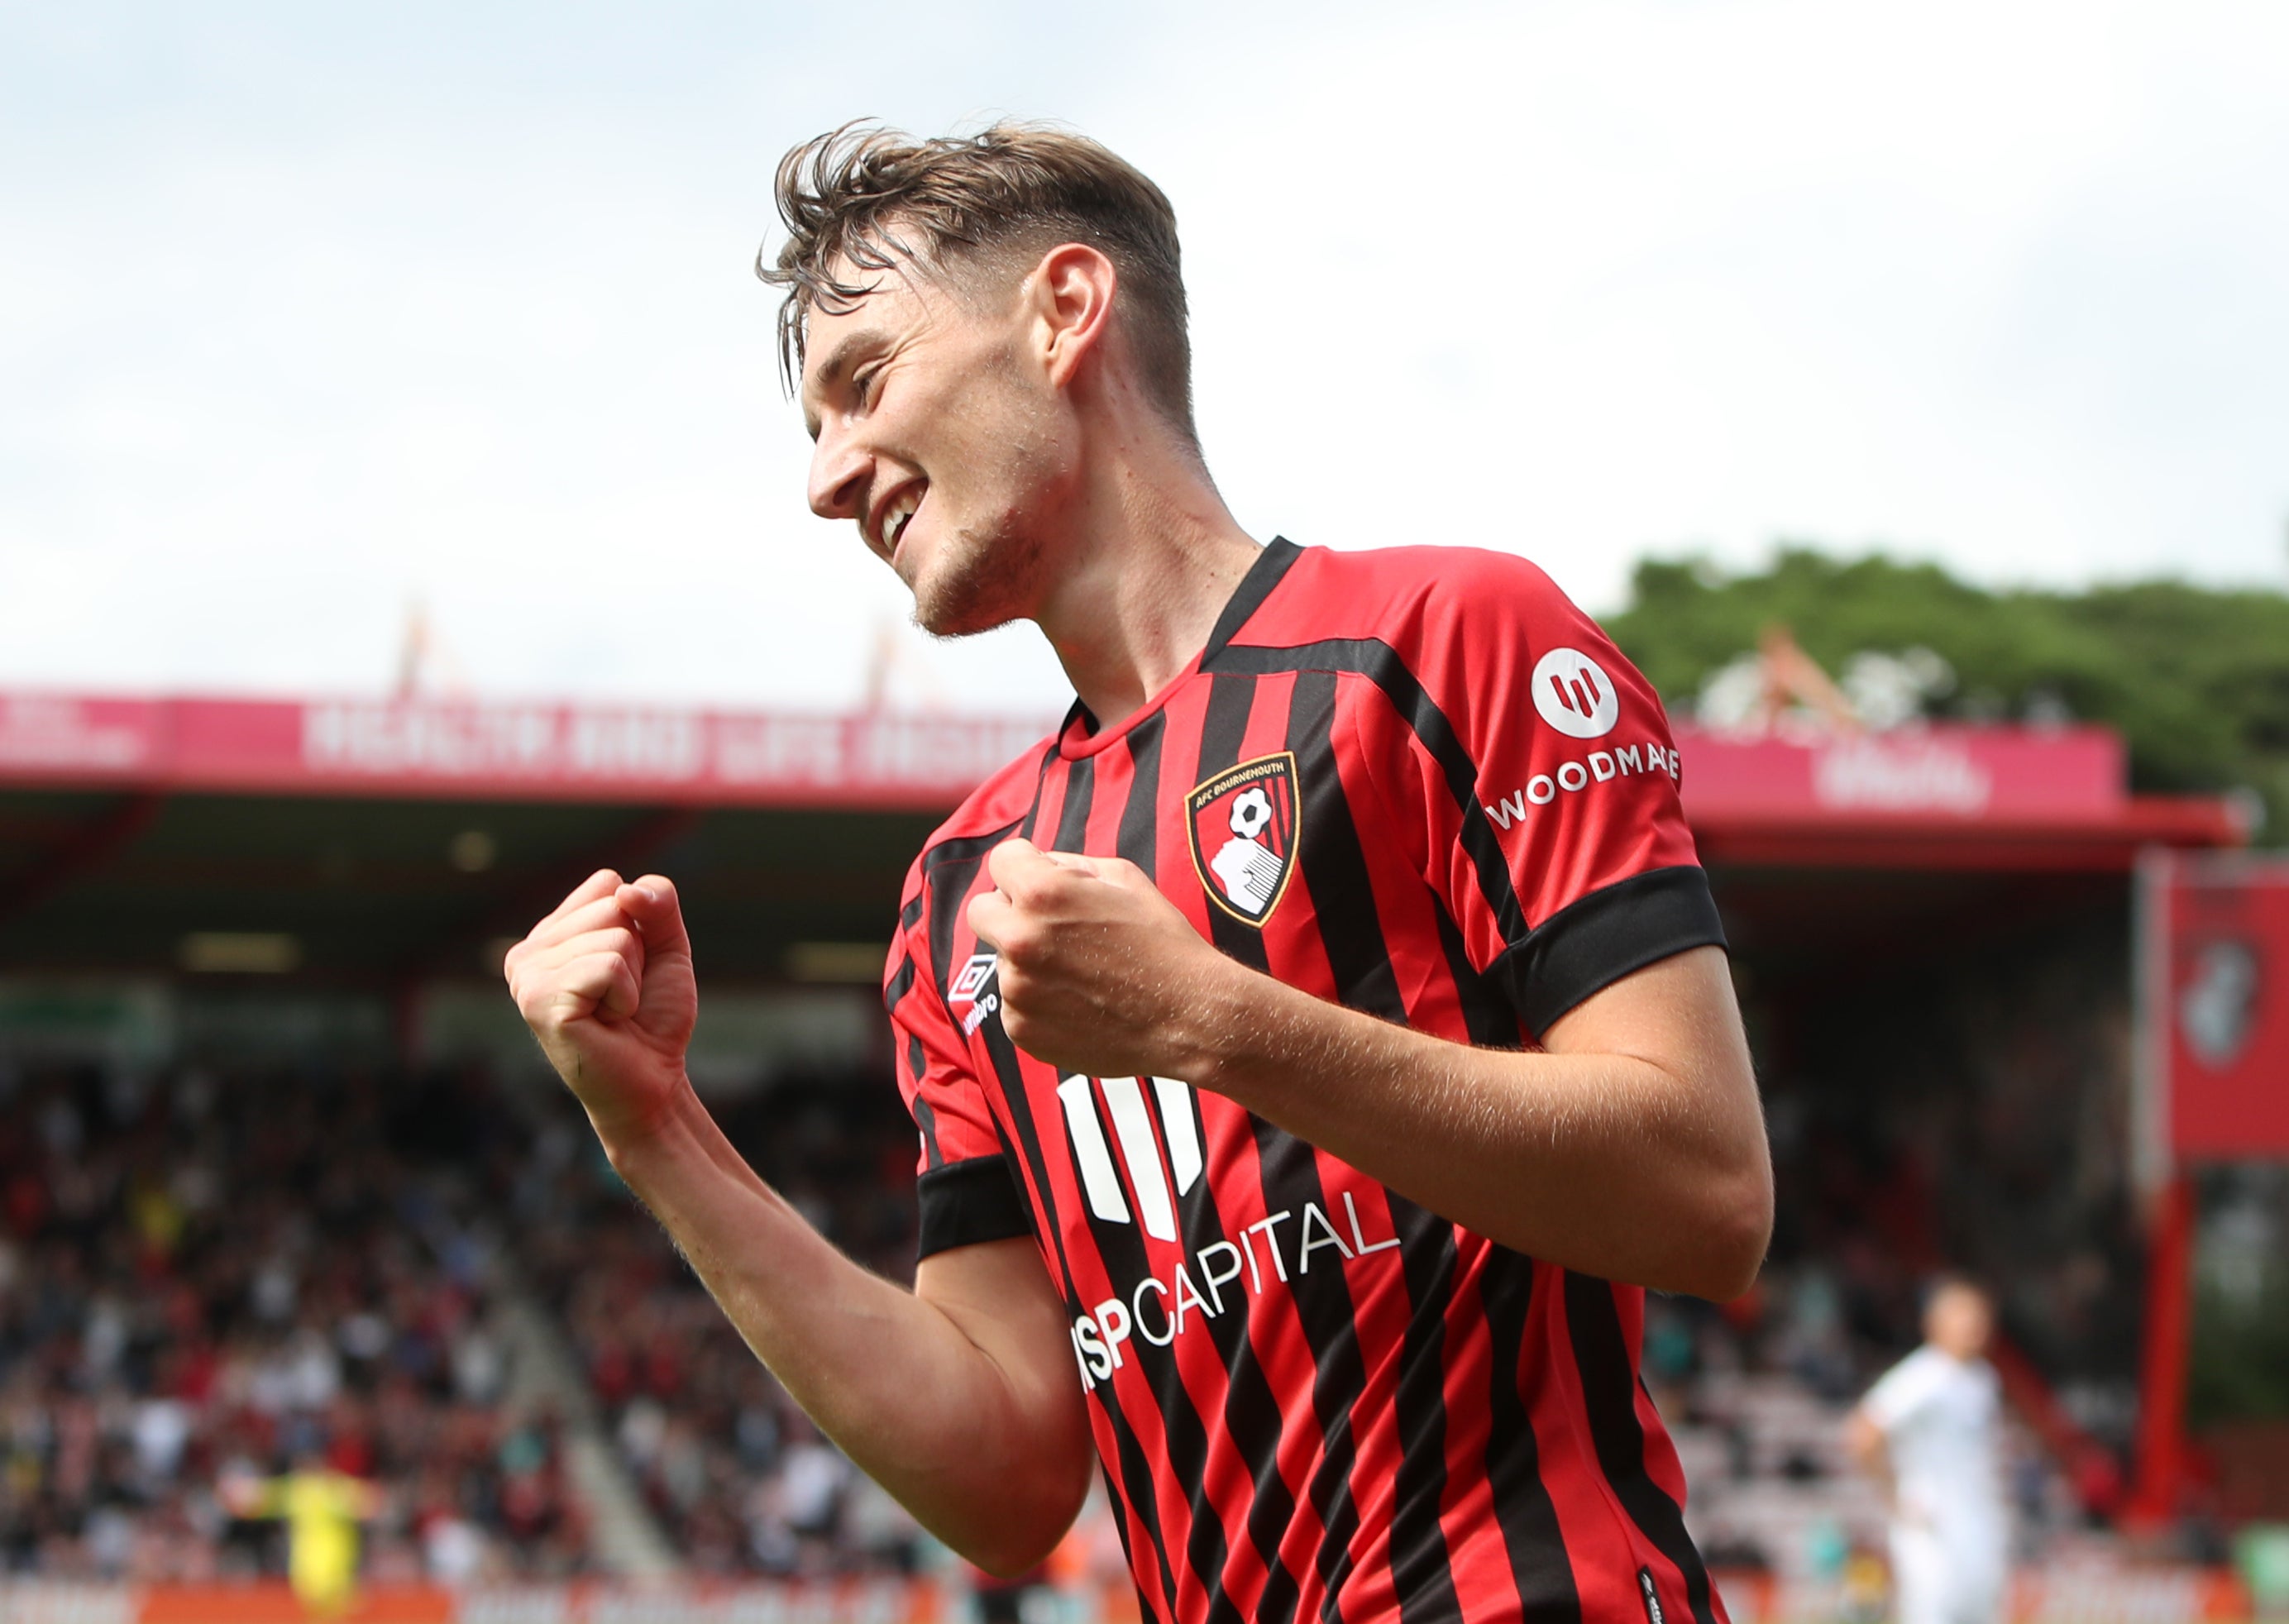 The Bournemouth winger was diagnosed with cancer of the lymphatic system in October